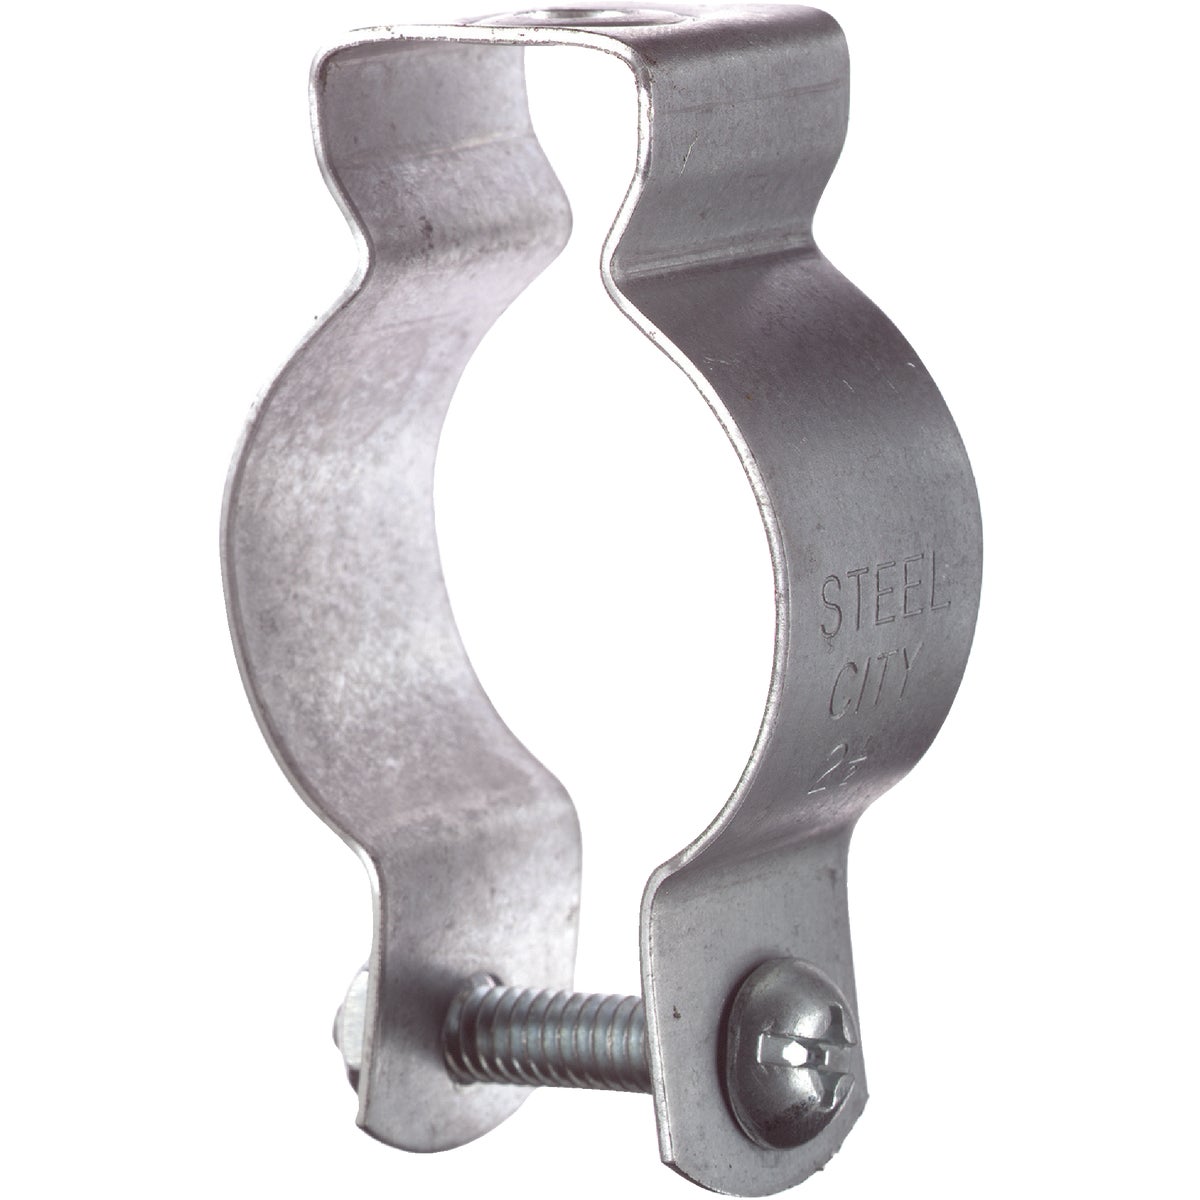 Item 554774, Conduit hanger ideal for use with EMT, IMC, and rigid conduit.